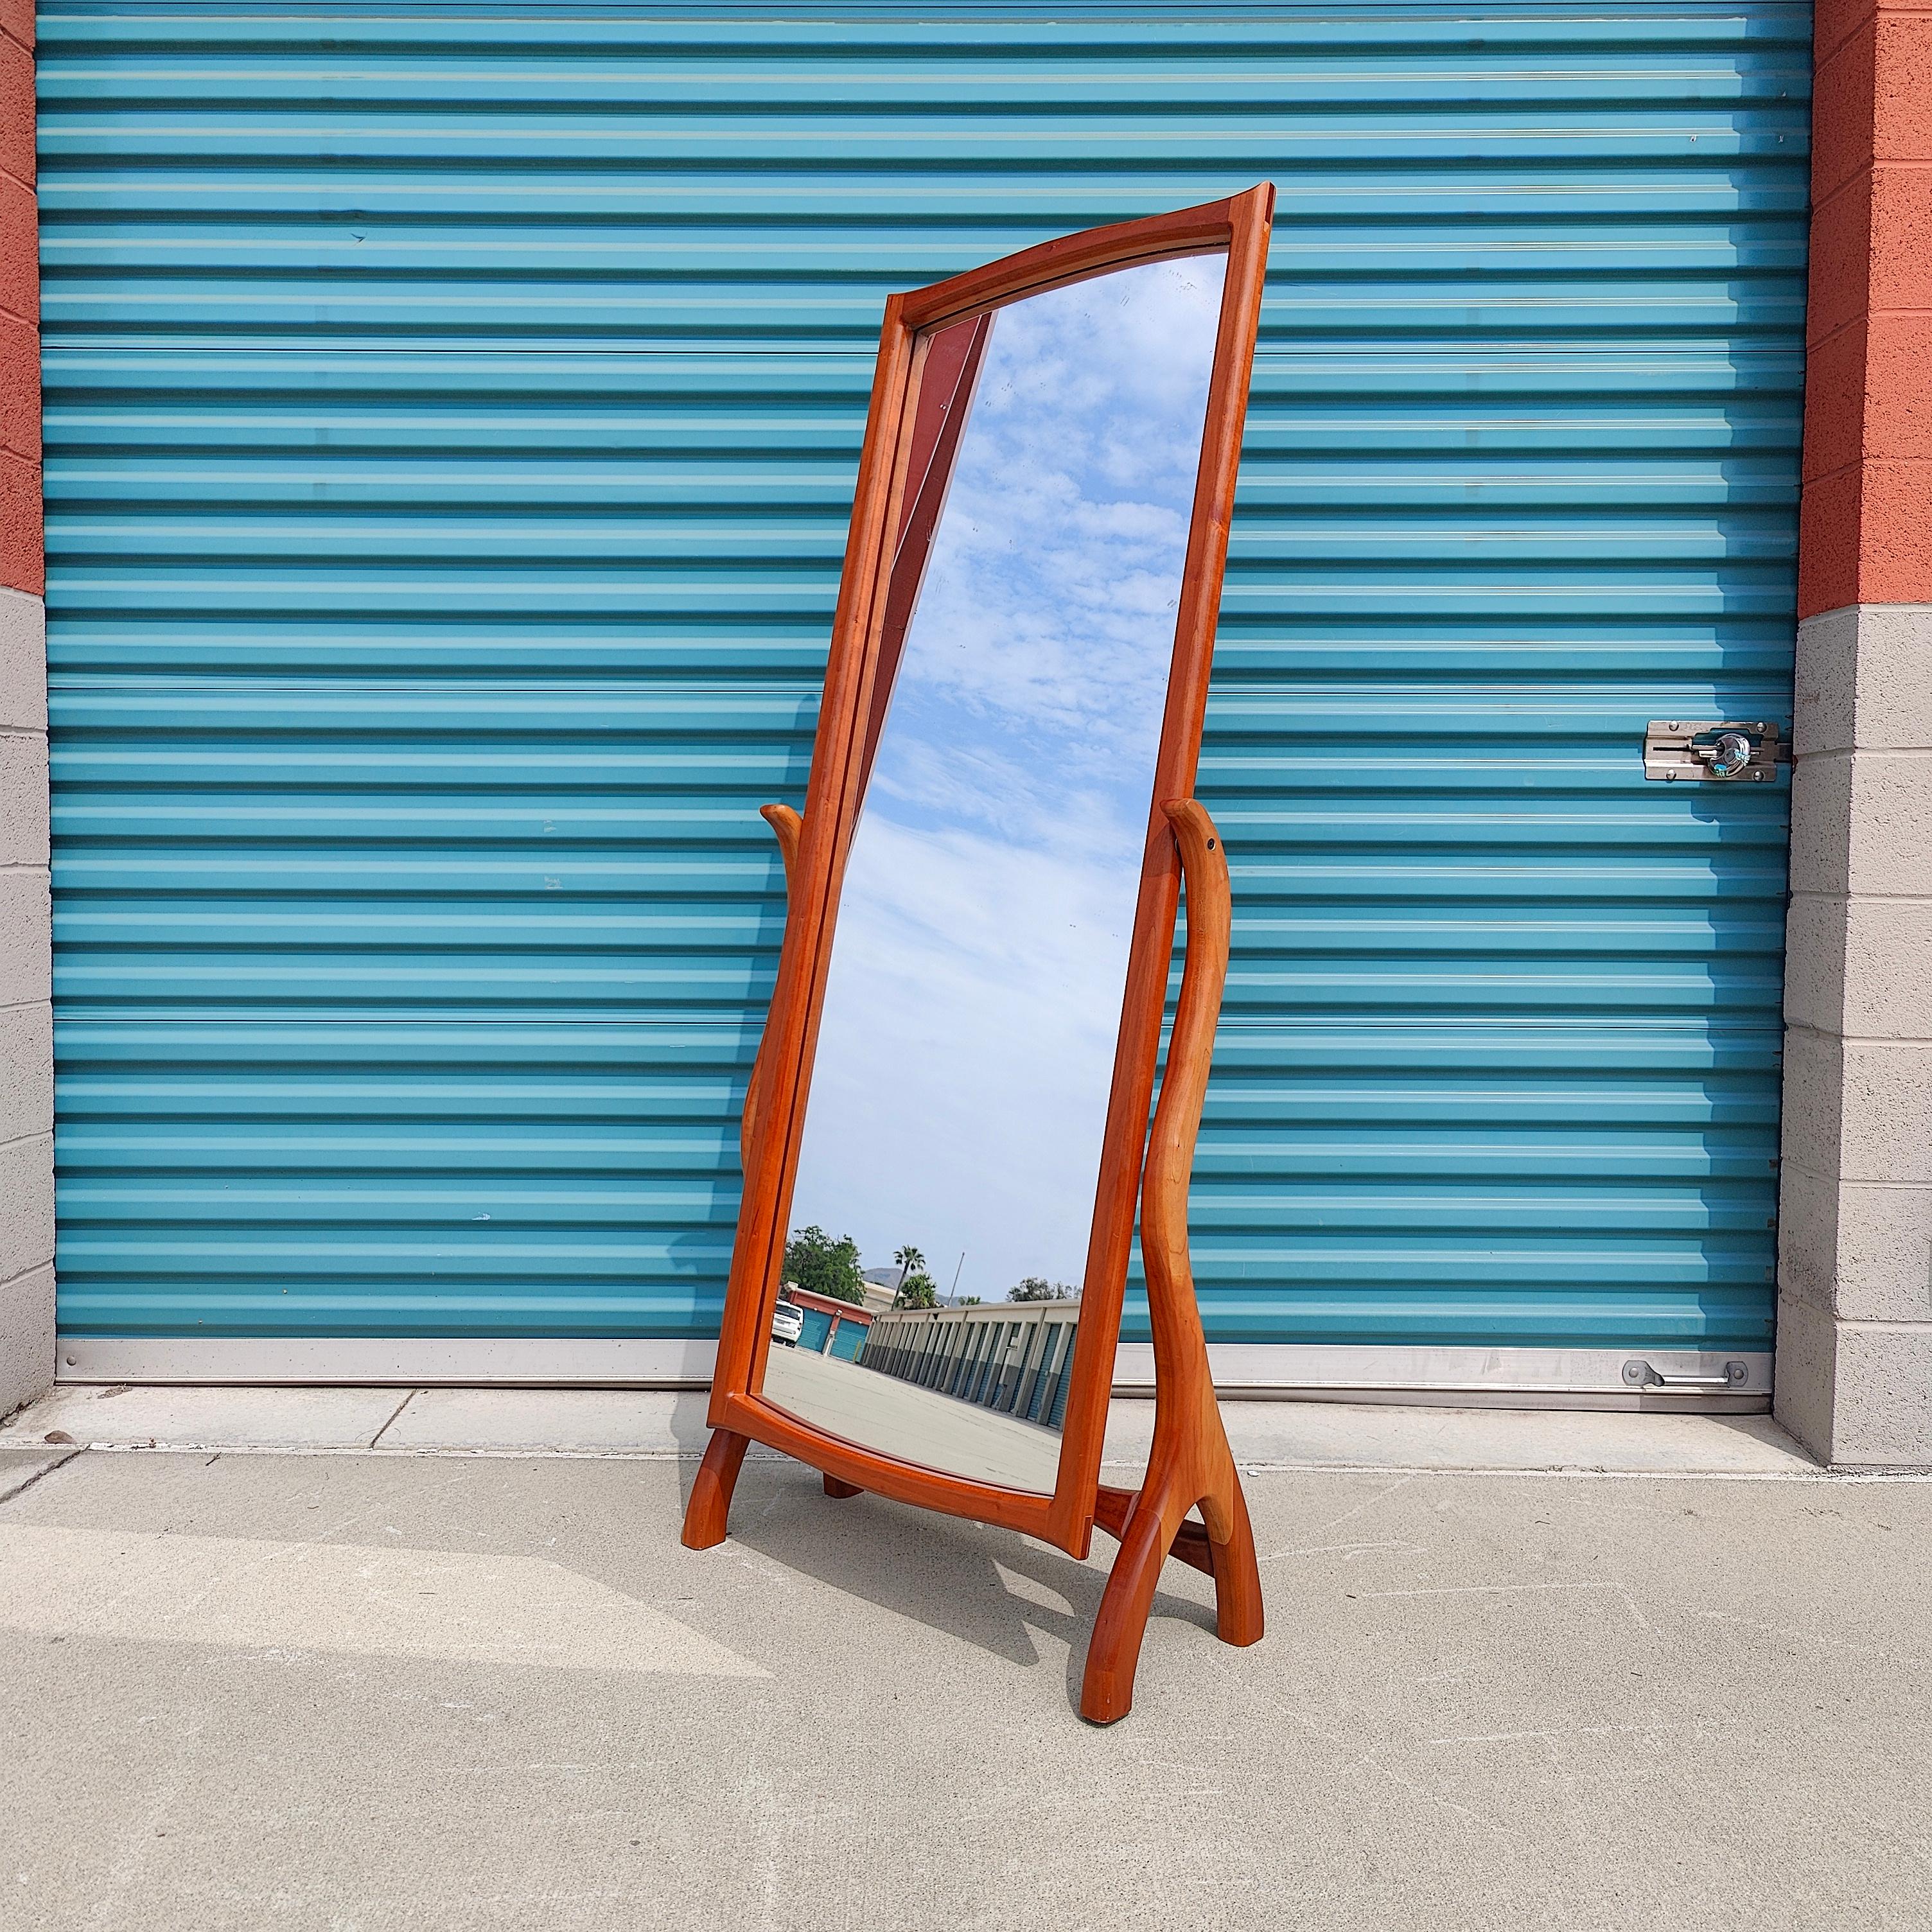 Just in, an extraordinary studio made mirror. Sourced from the original owner, this sleek mirror features curvaceous frame that is simple, yet elegant in design. Made out of solid walnut, this mirror also features a tilting option to adjust to your